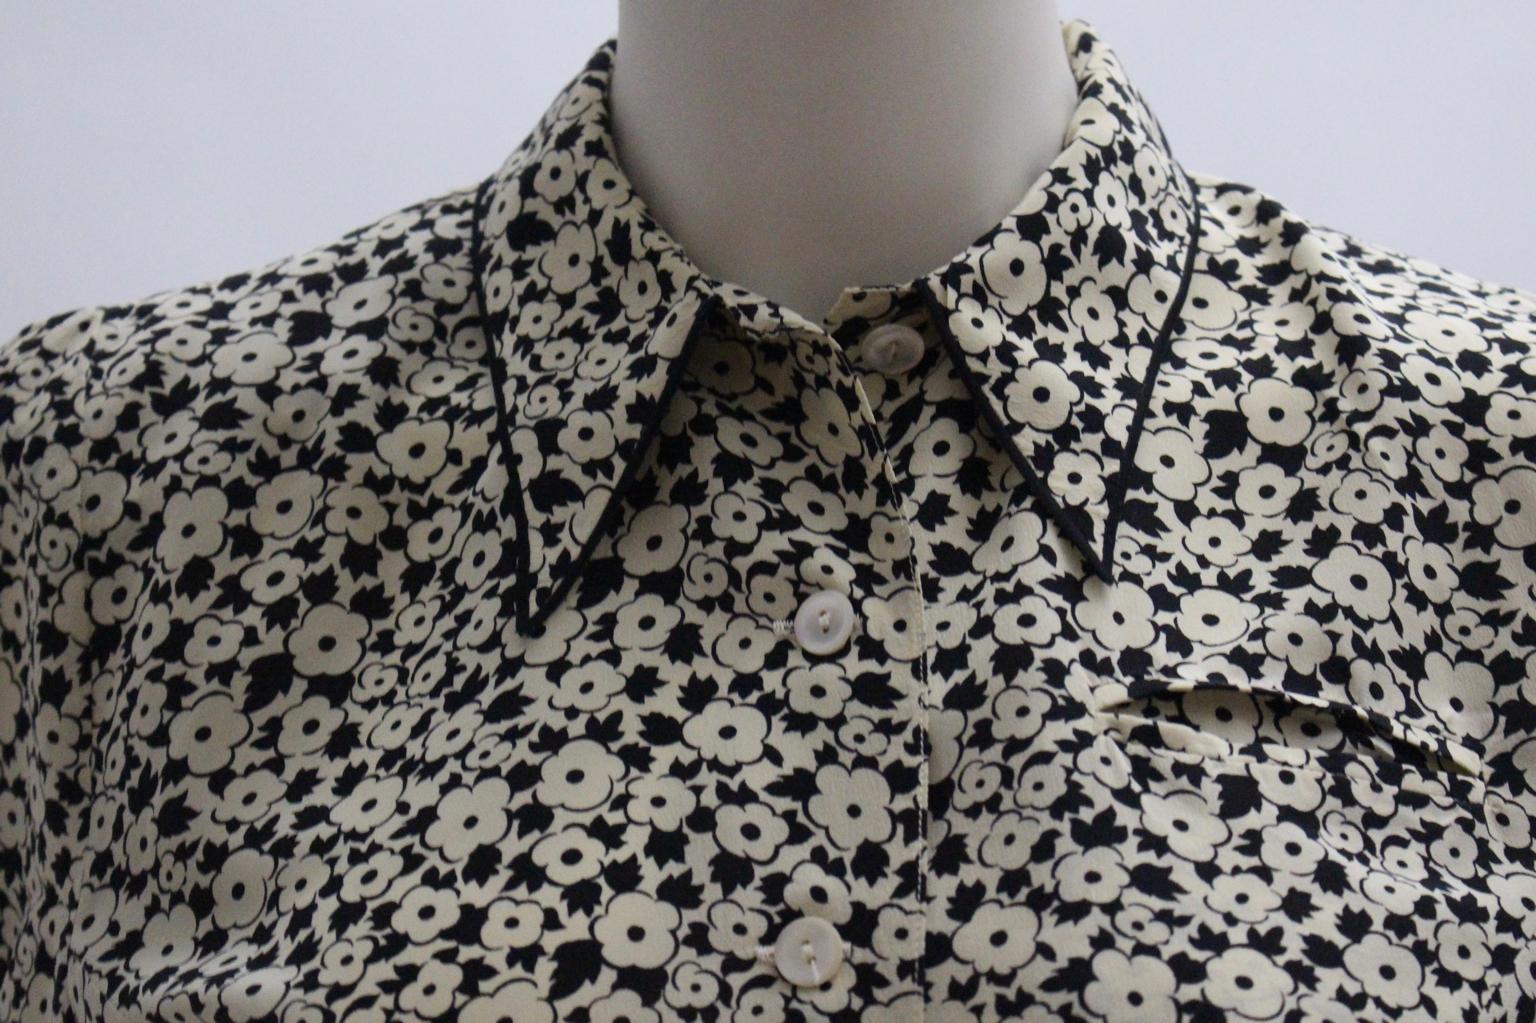 Lolita Lempicka Vintage Silk Blouse with Flower Allover Print  1980s For Sale 2